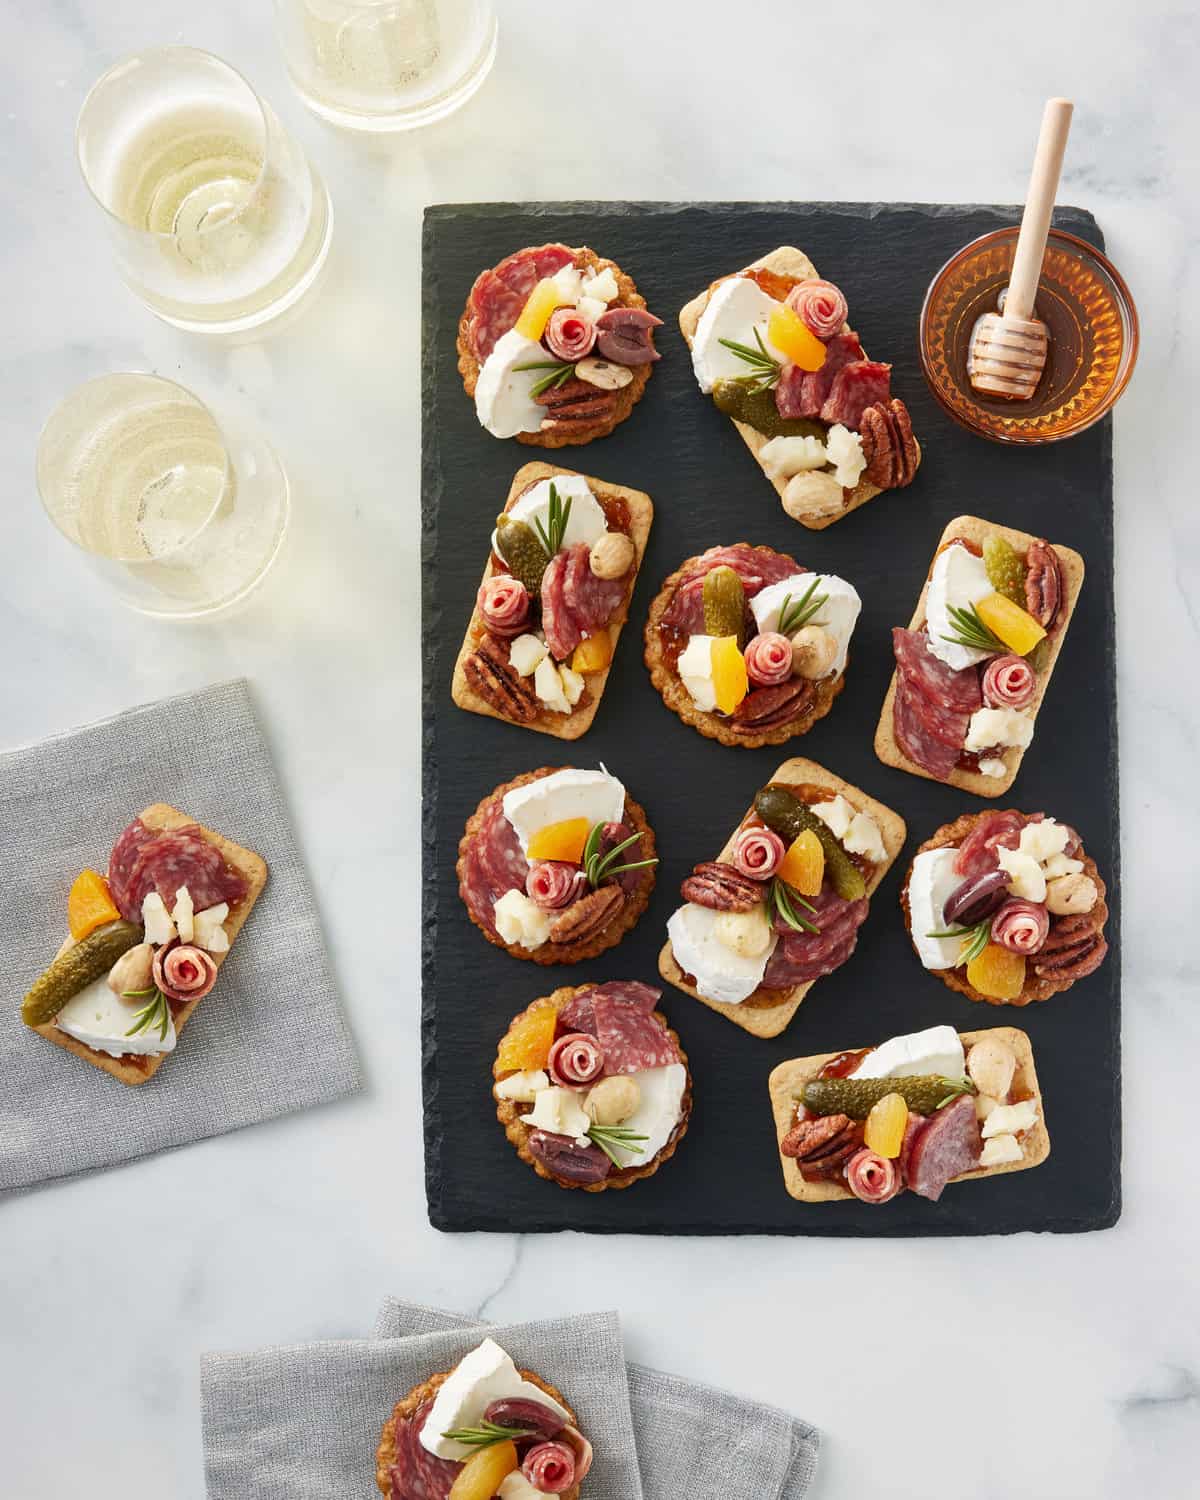 10 round and rectangle shaped crackers topped with tiny bites of cheese, nuts and tiny soprasetta roses.